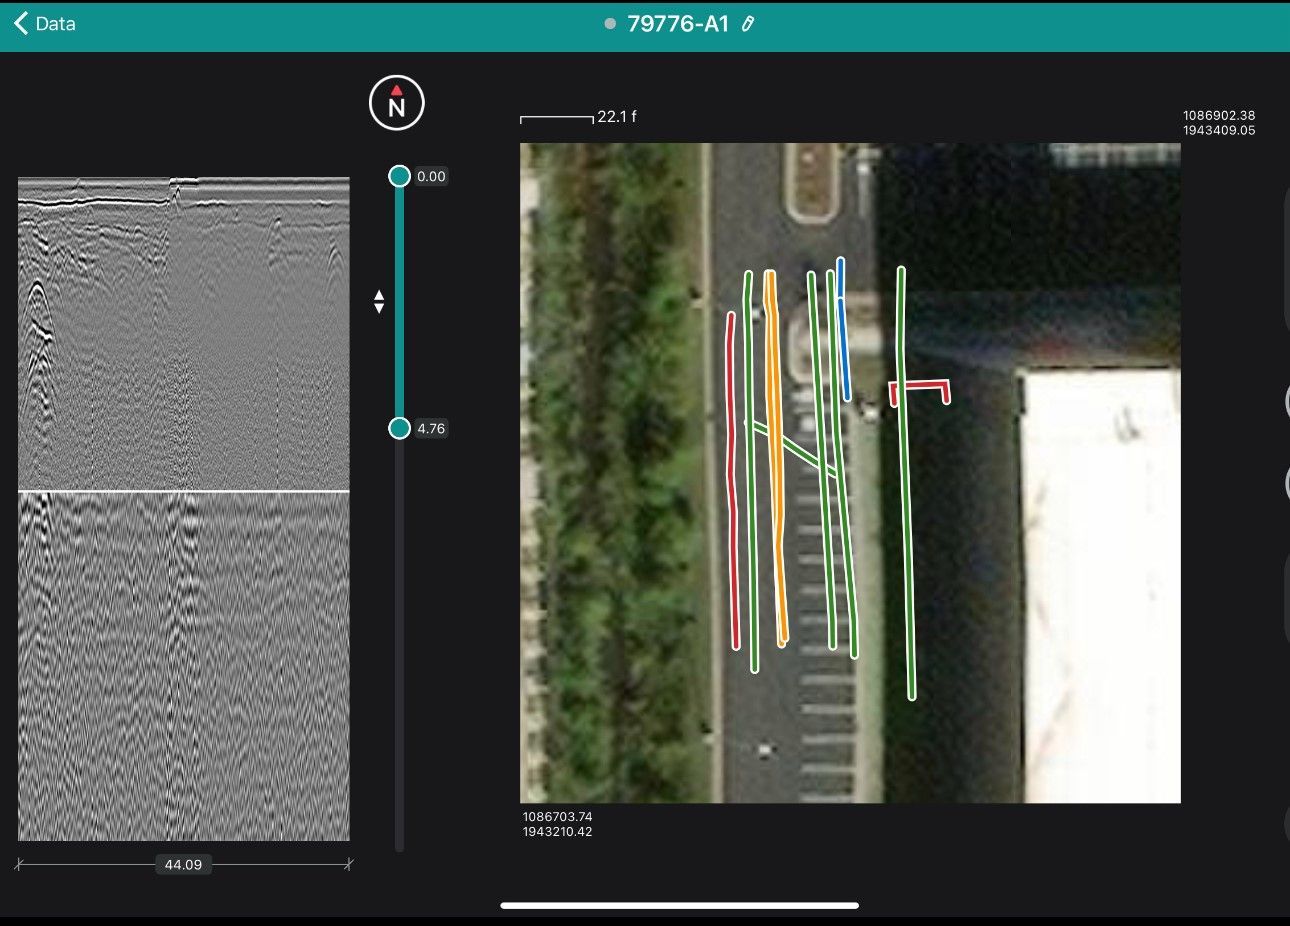 A screenshot of a GPR scan showing the private utilities identified within a slab of concrete.